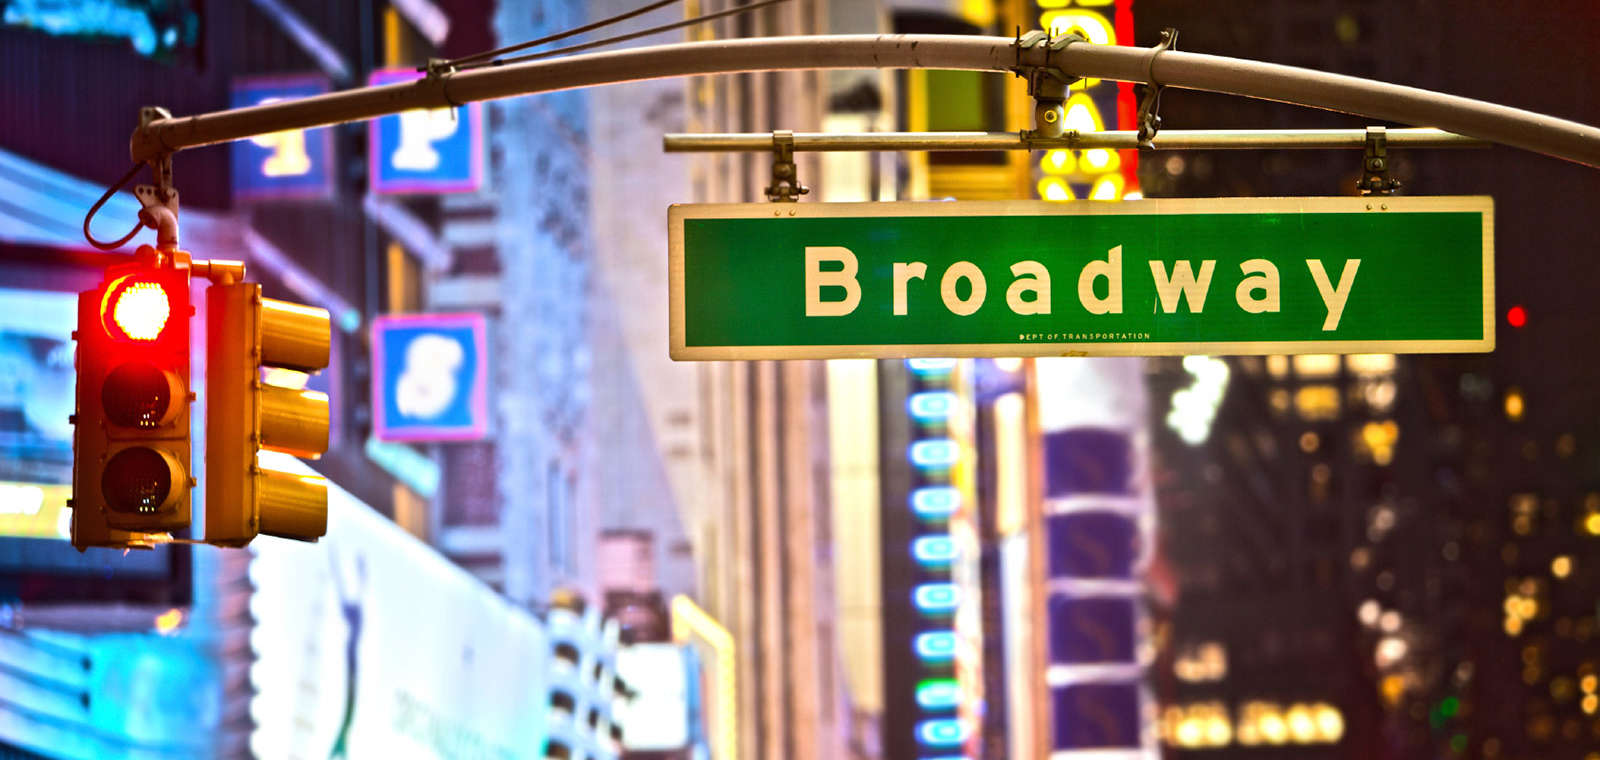 Broadway Street Sign And Stop Light